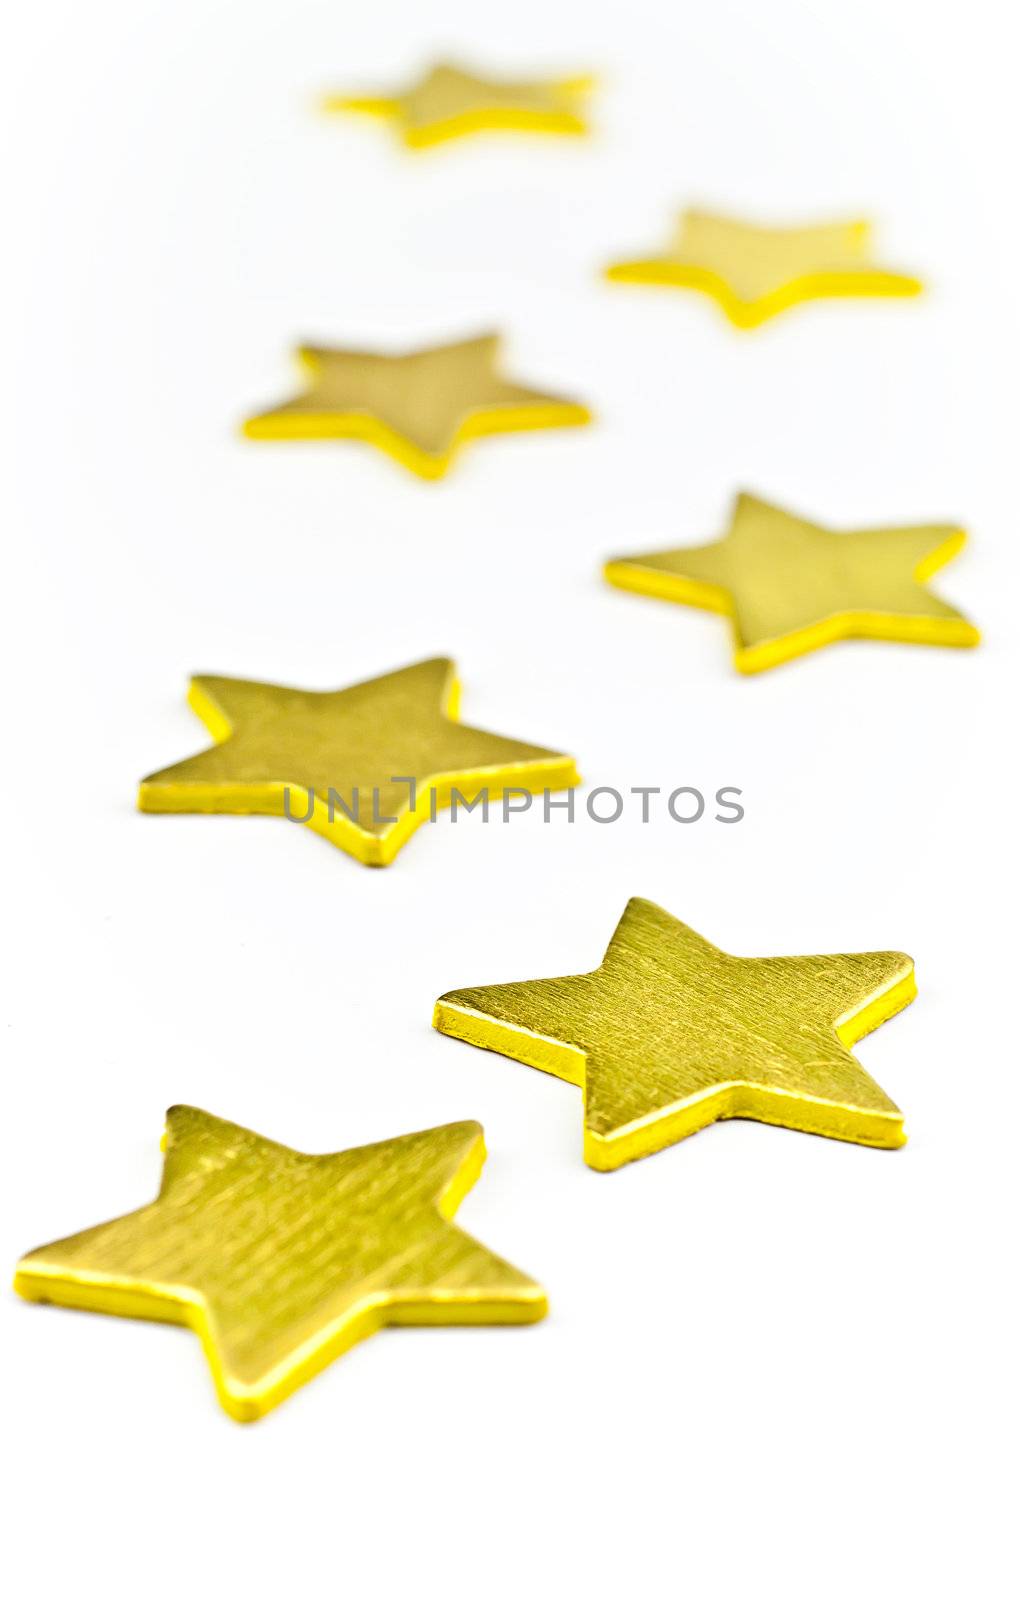 On a white background, gold stars all in a horizontal position

